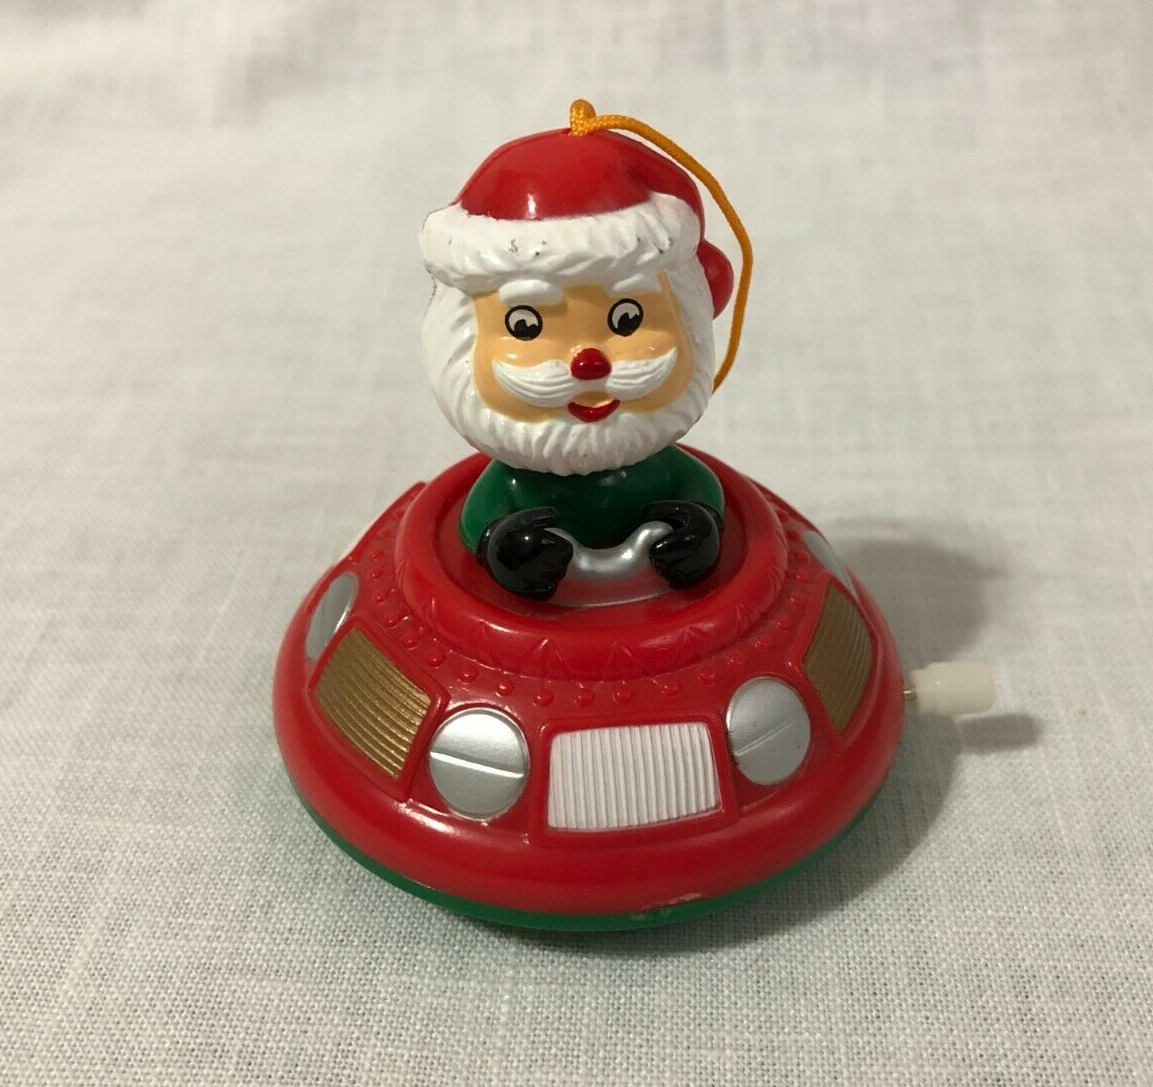 Santa Claus In Wind Up Flying Saucer Spins And Rolls Christmas Toy Ornament